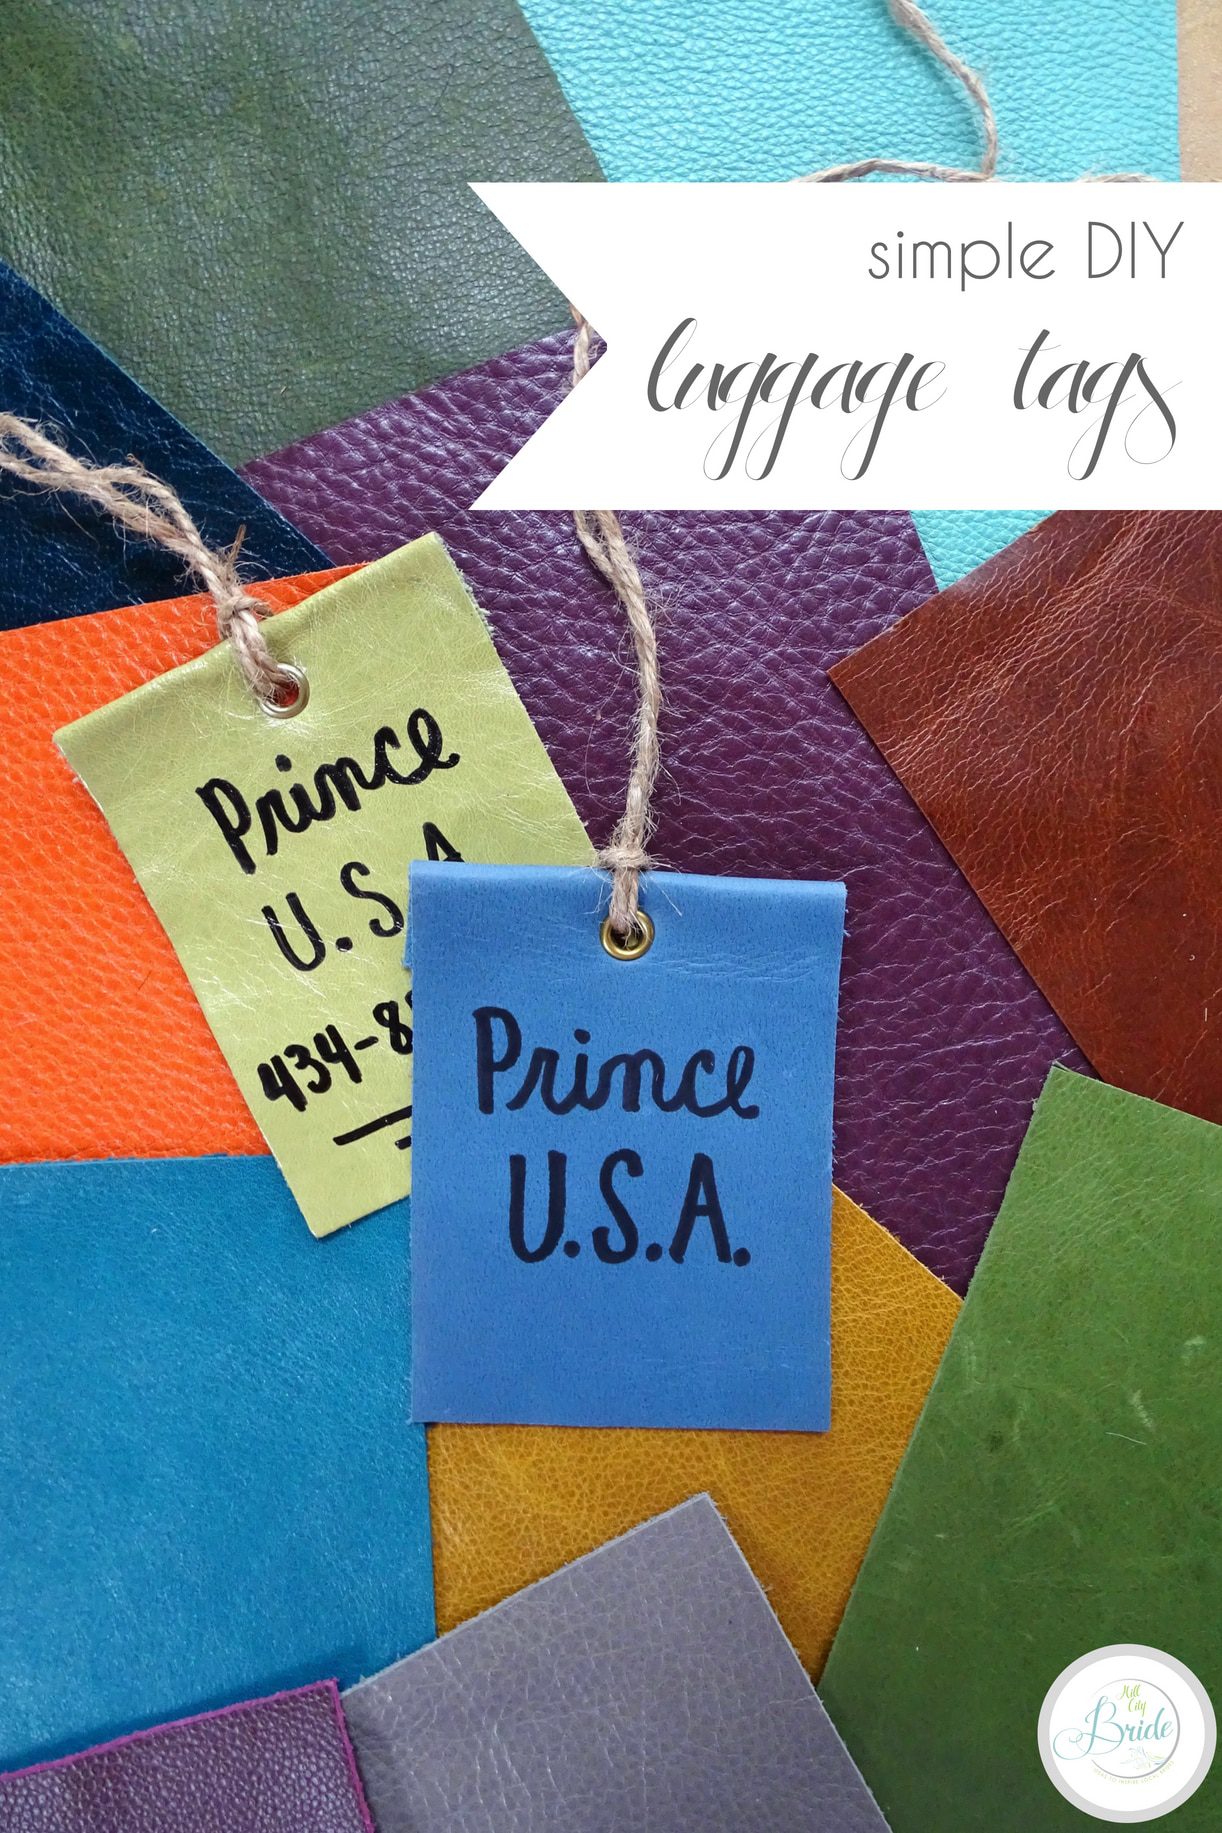 Simple DIY Luggage Tags in Leather for Honeymoon Travel | Hill City Bride Virginia Wedding Blog